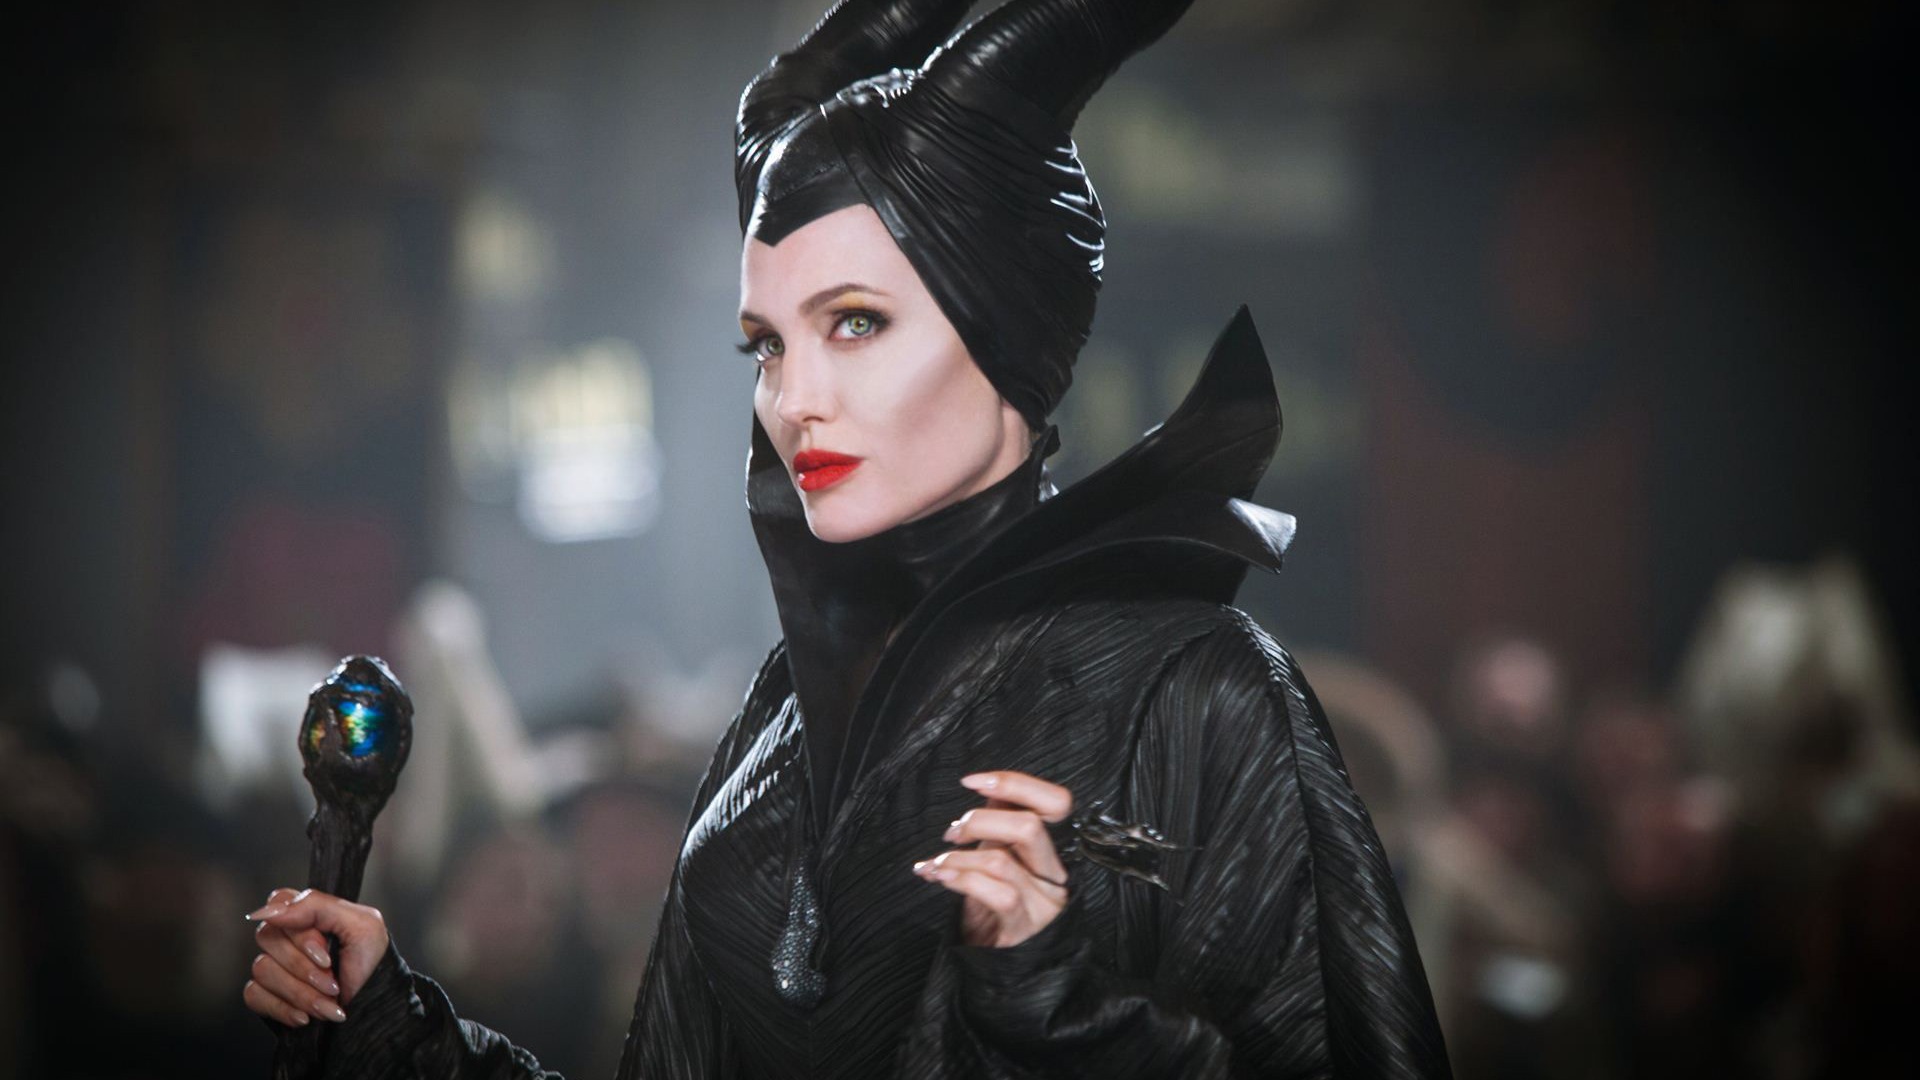 Maleficent 2014 HD movie wallpapers #9 - 1920x1080